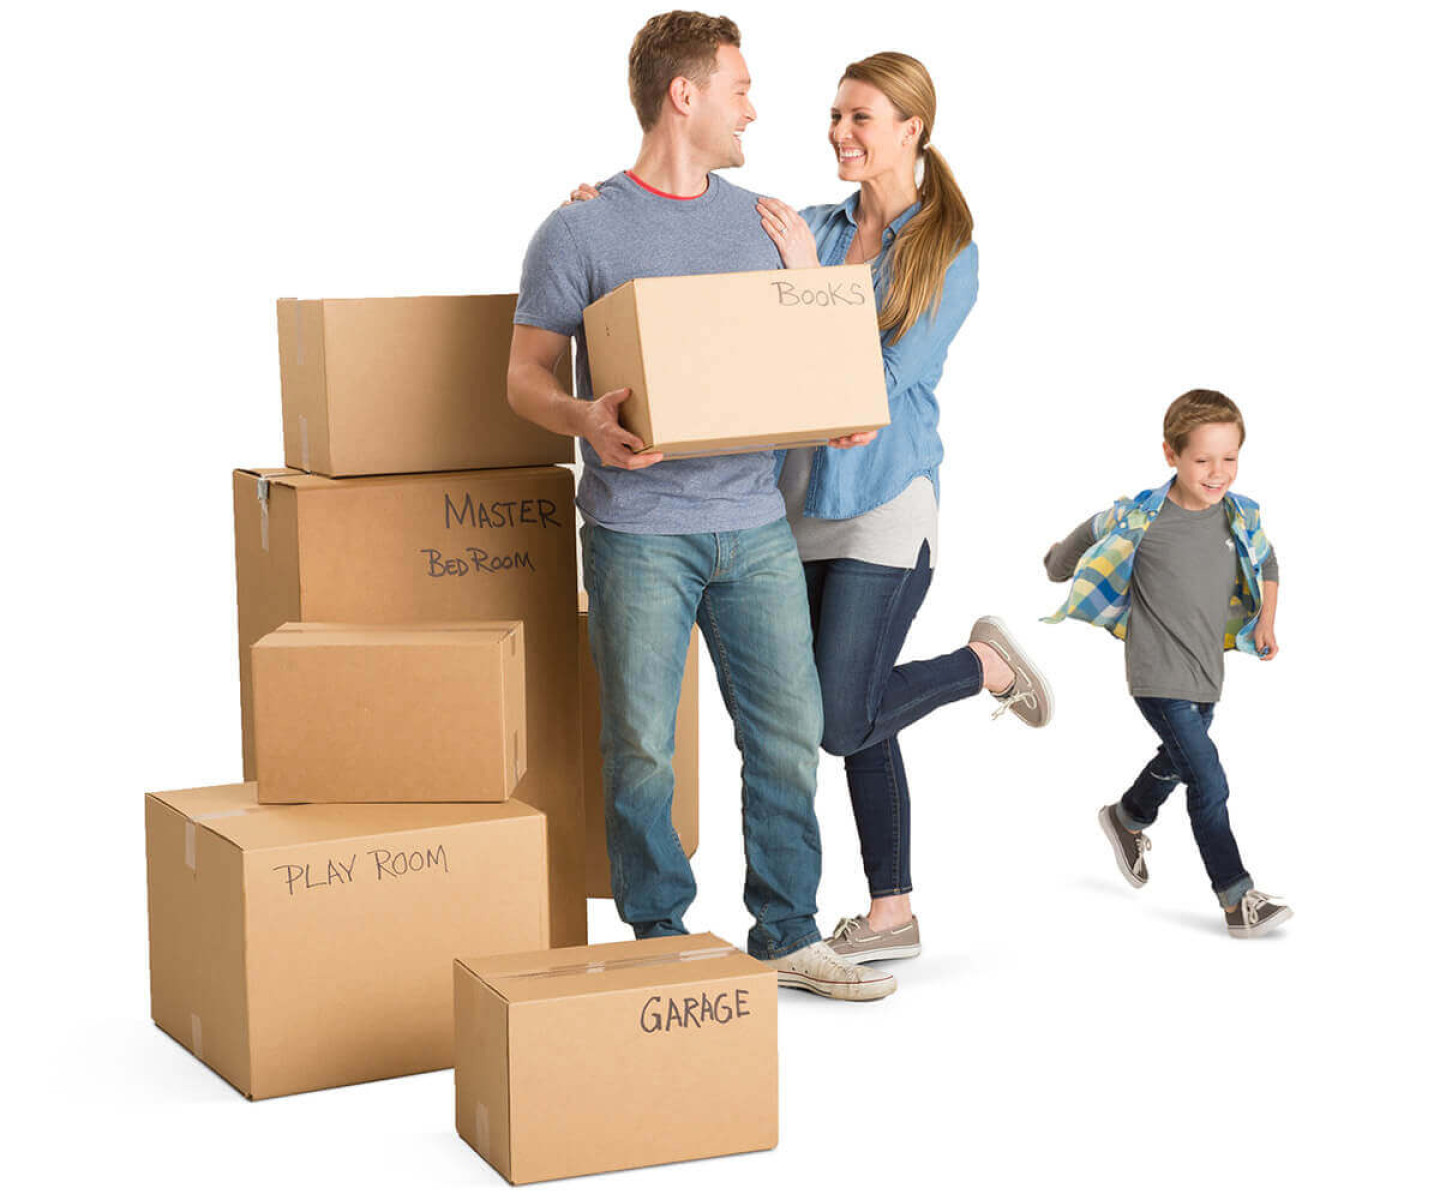 Young family amid moving boxes